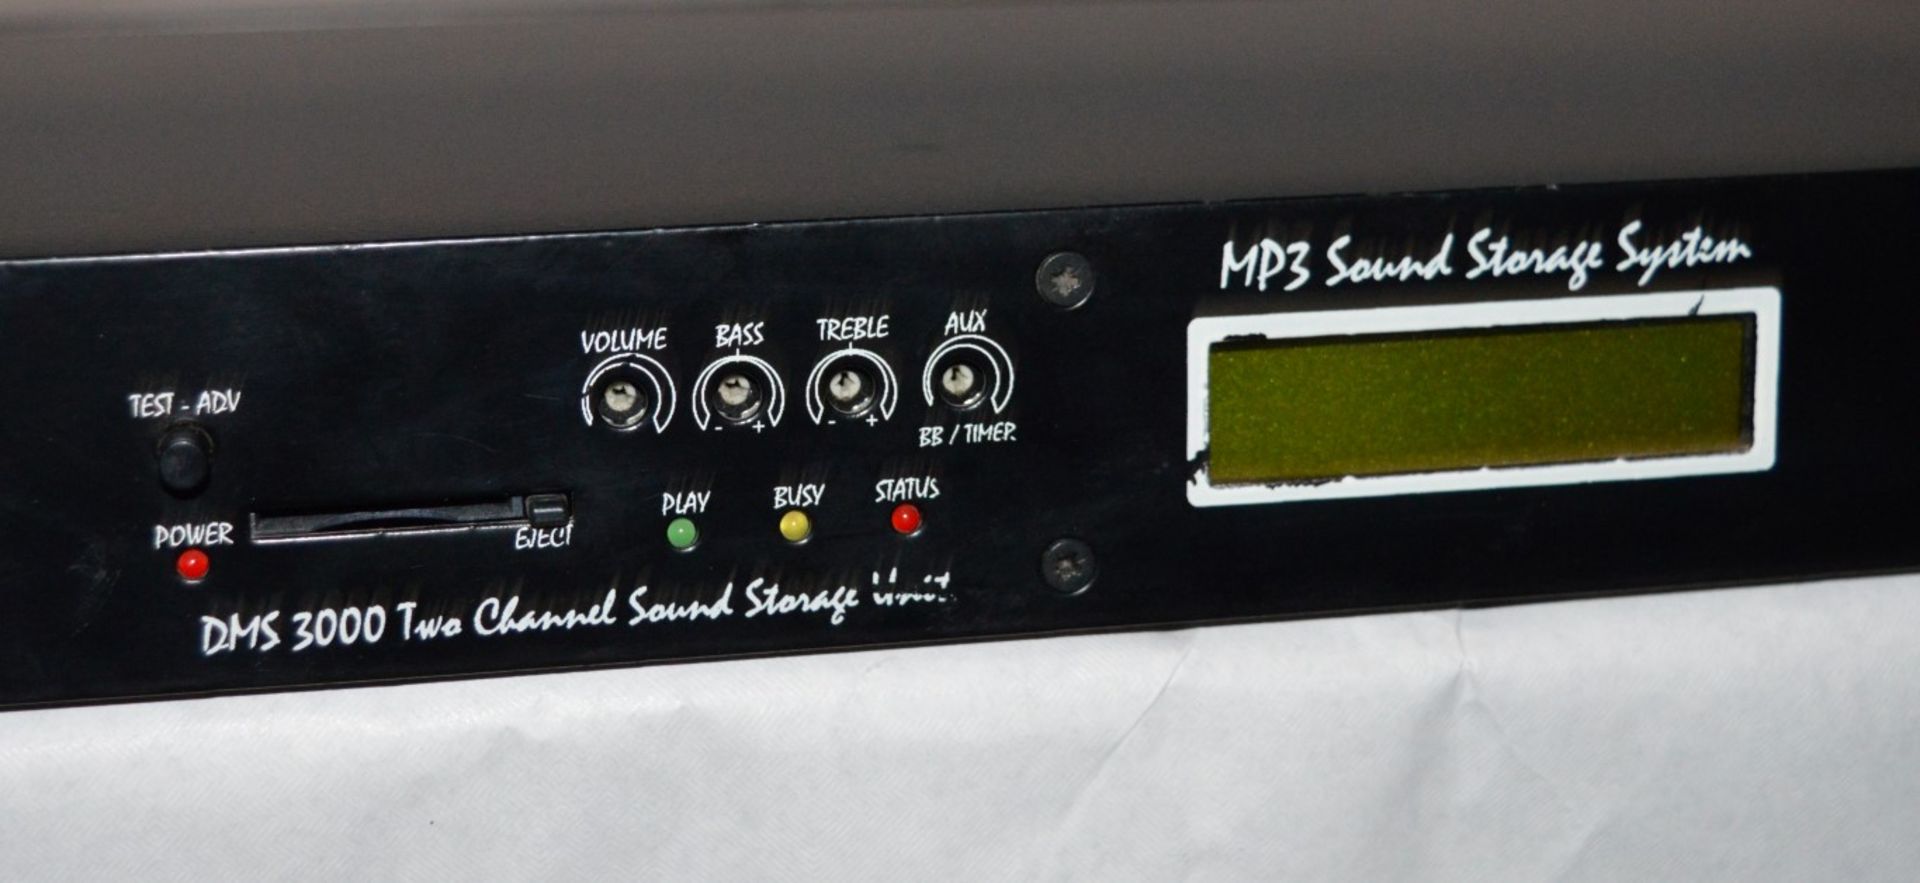 1 x DMS 3000 1U MP3 Sound Store Storage System With SD Card Slot - Golding Audio Ltd - Suited to - Image 5 of 5